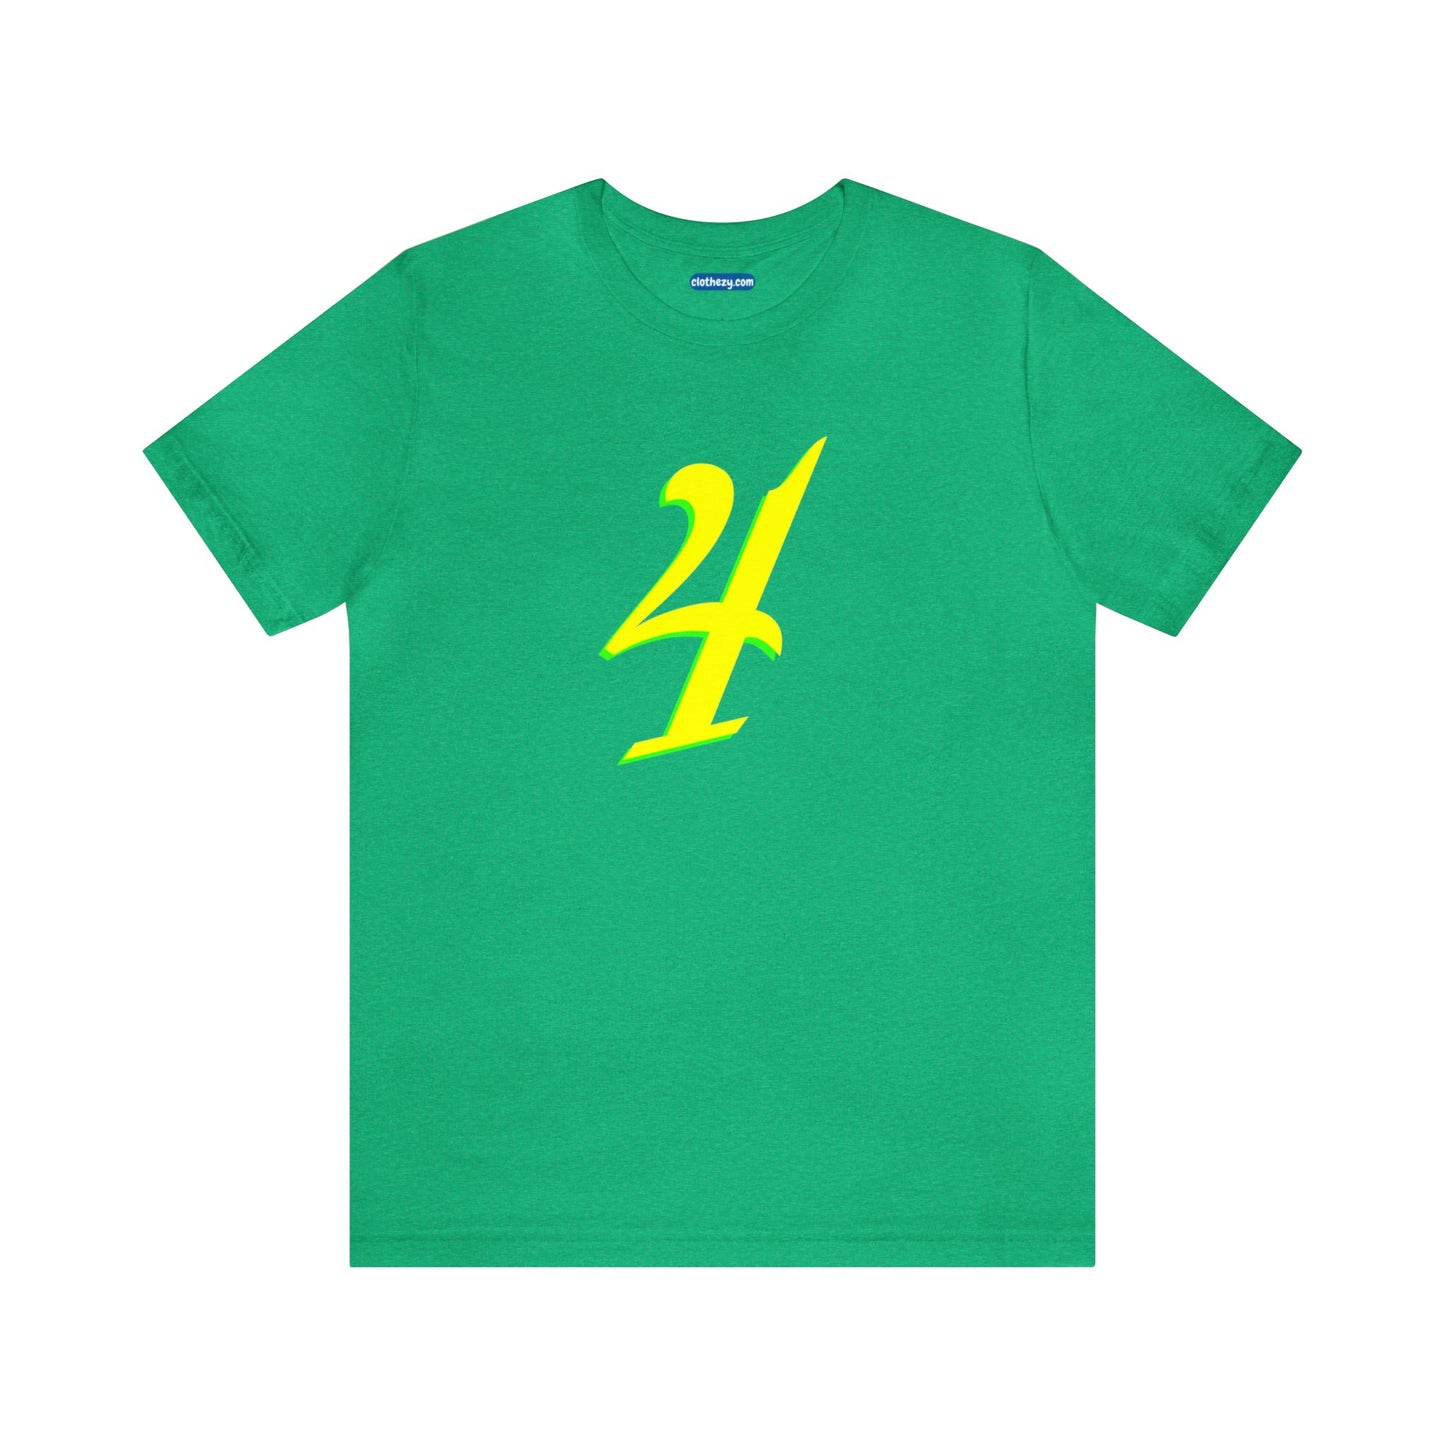 Number 4 Design - Soft Cotton Tee for birthdays and celebrations, Gift for friends and family, Multiple Options by clothezy.com in Green Heather Size Small - Buy Now